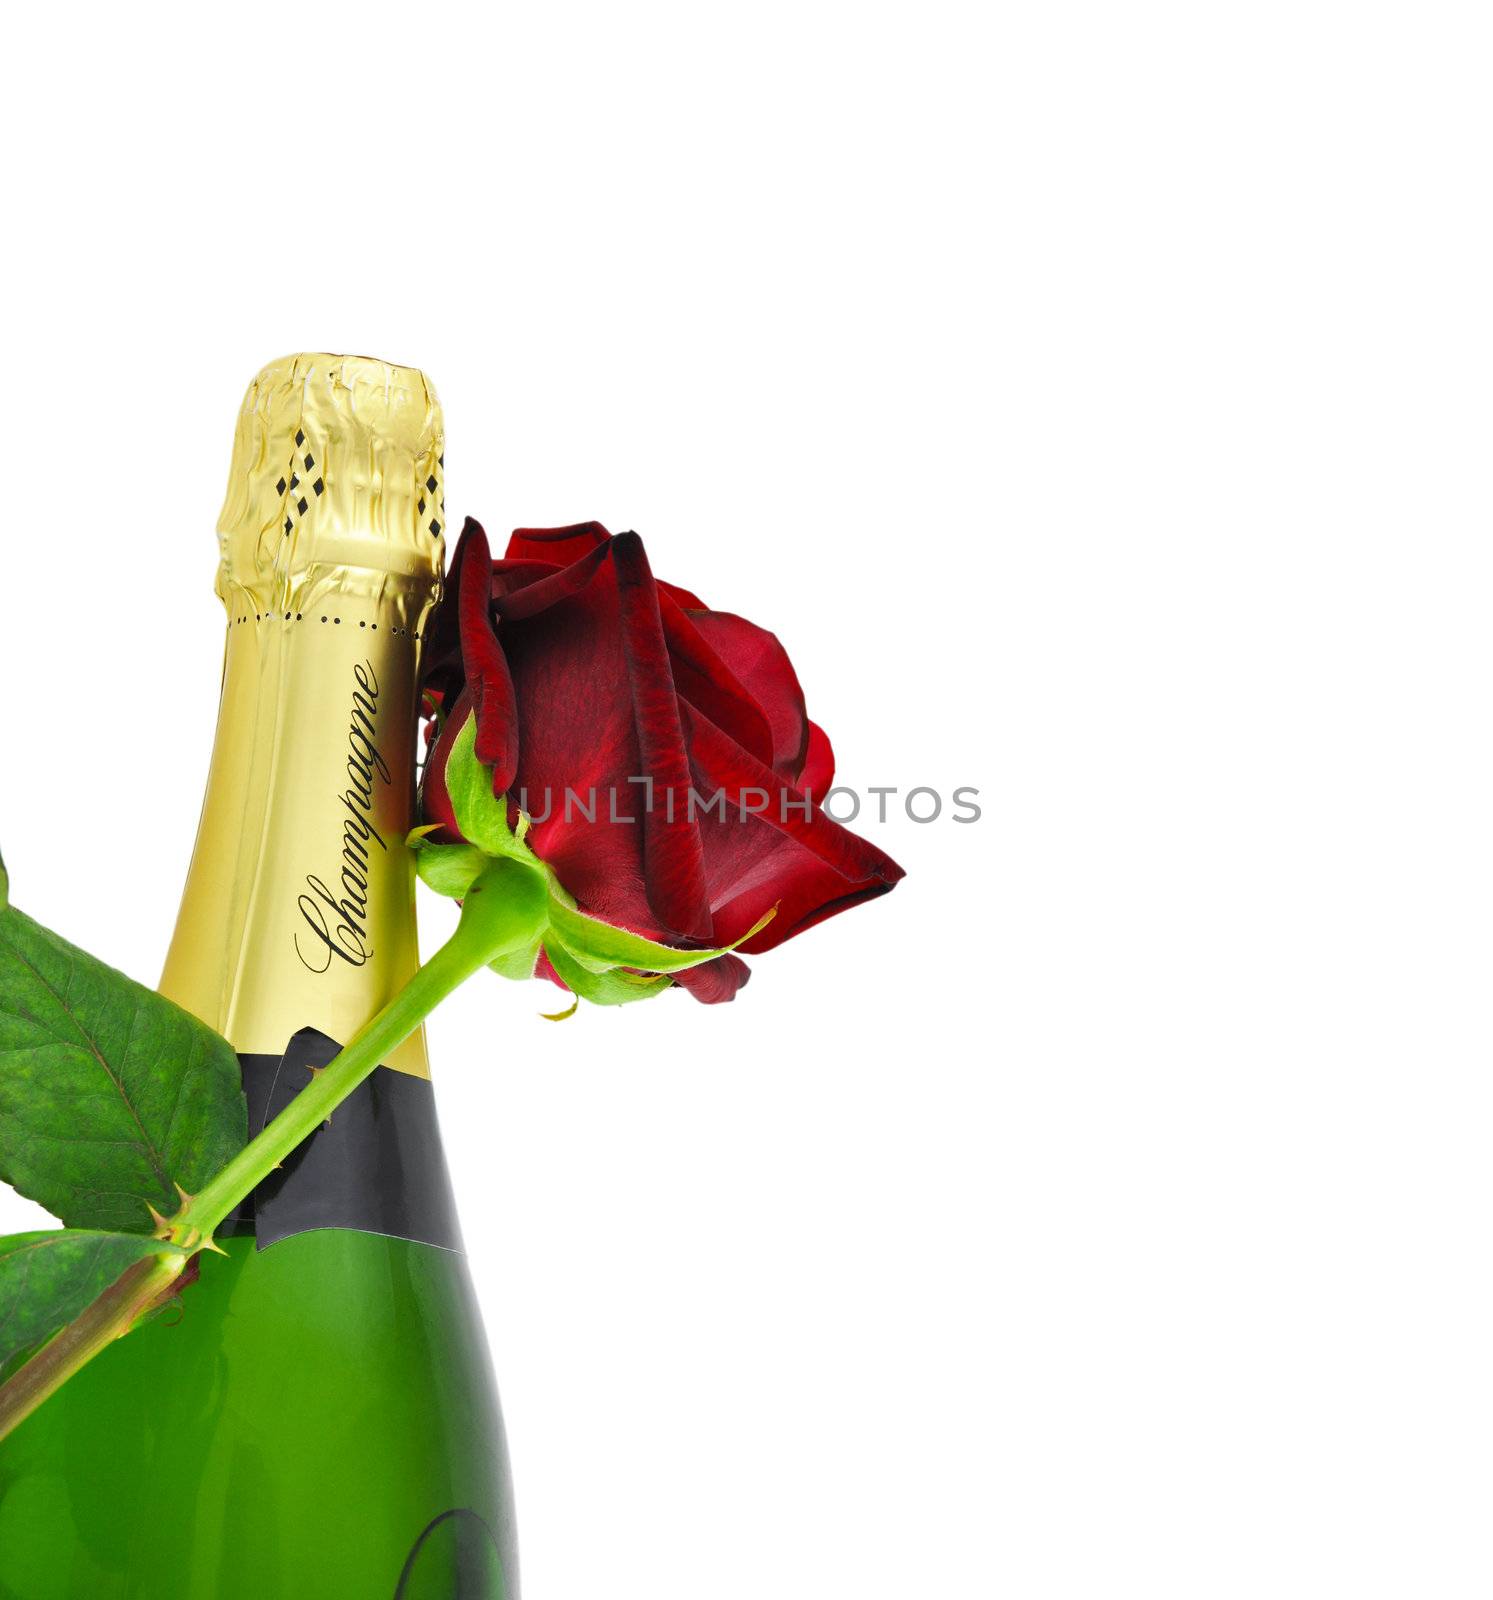 Bottle of Champagne and a red rose by dutourdumonde